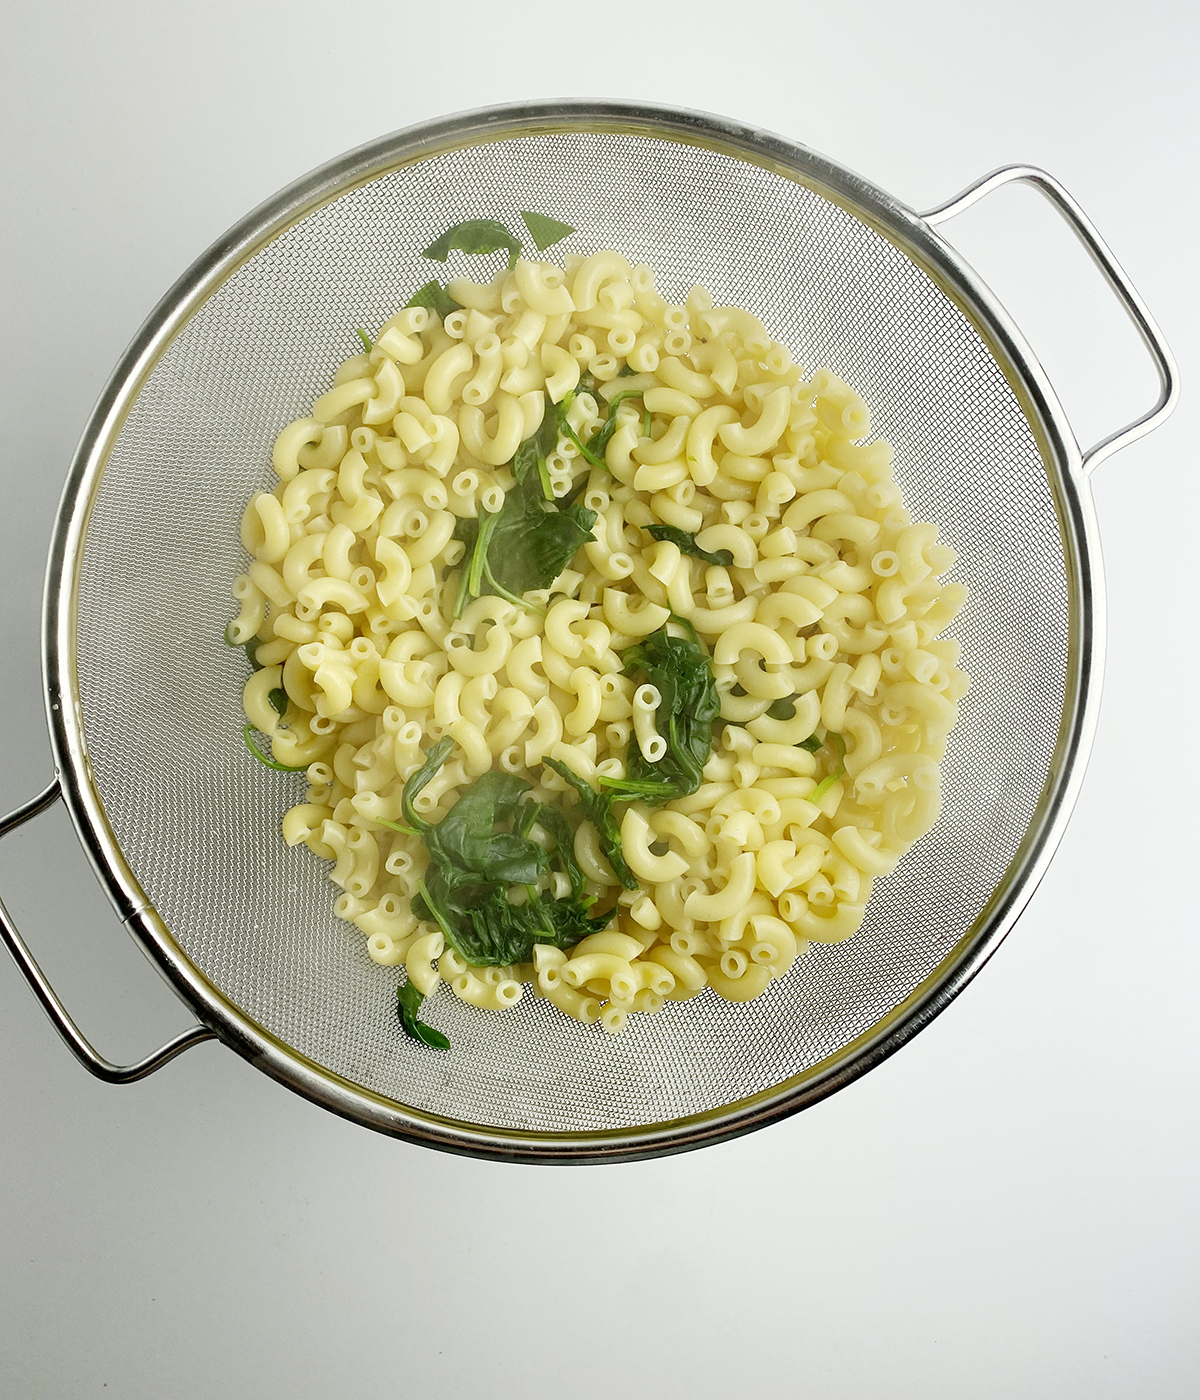 Cooked elbow macaroni and spinach draining in a strainer.